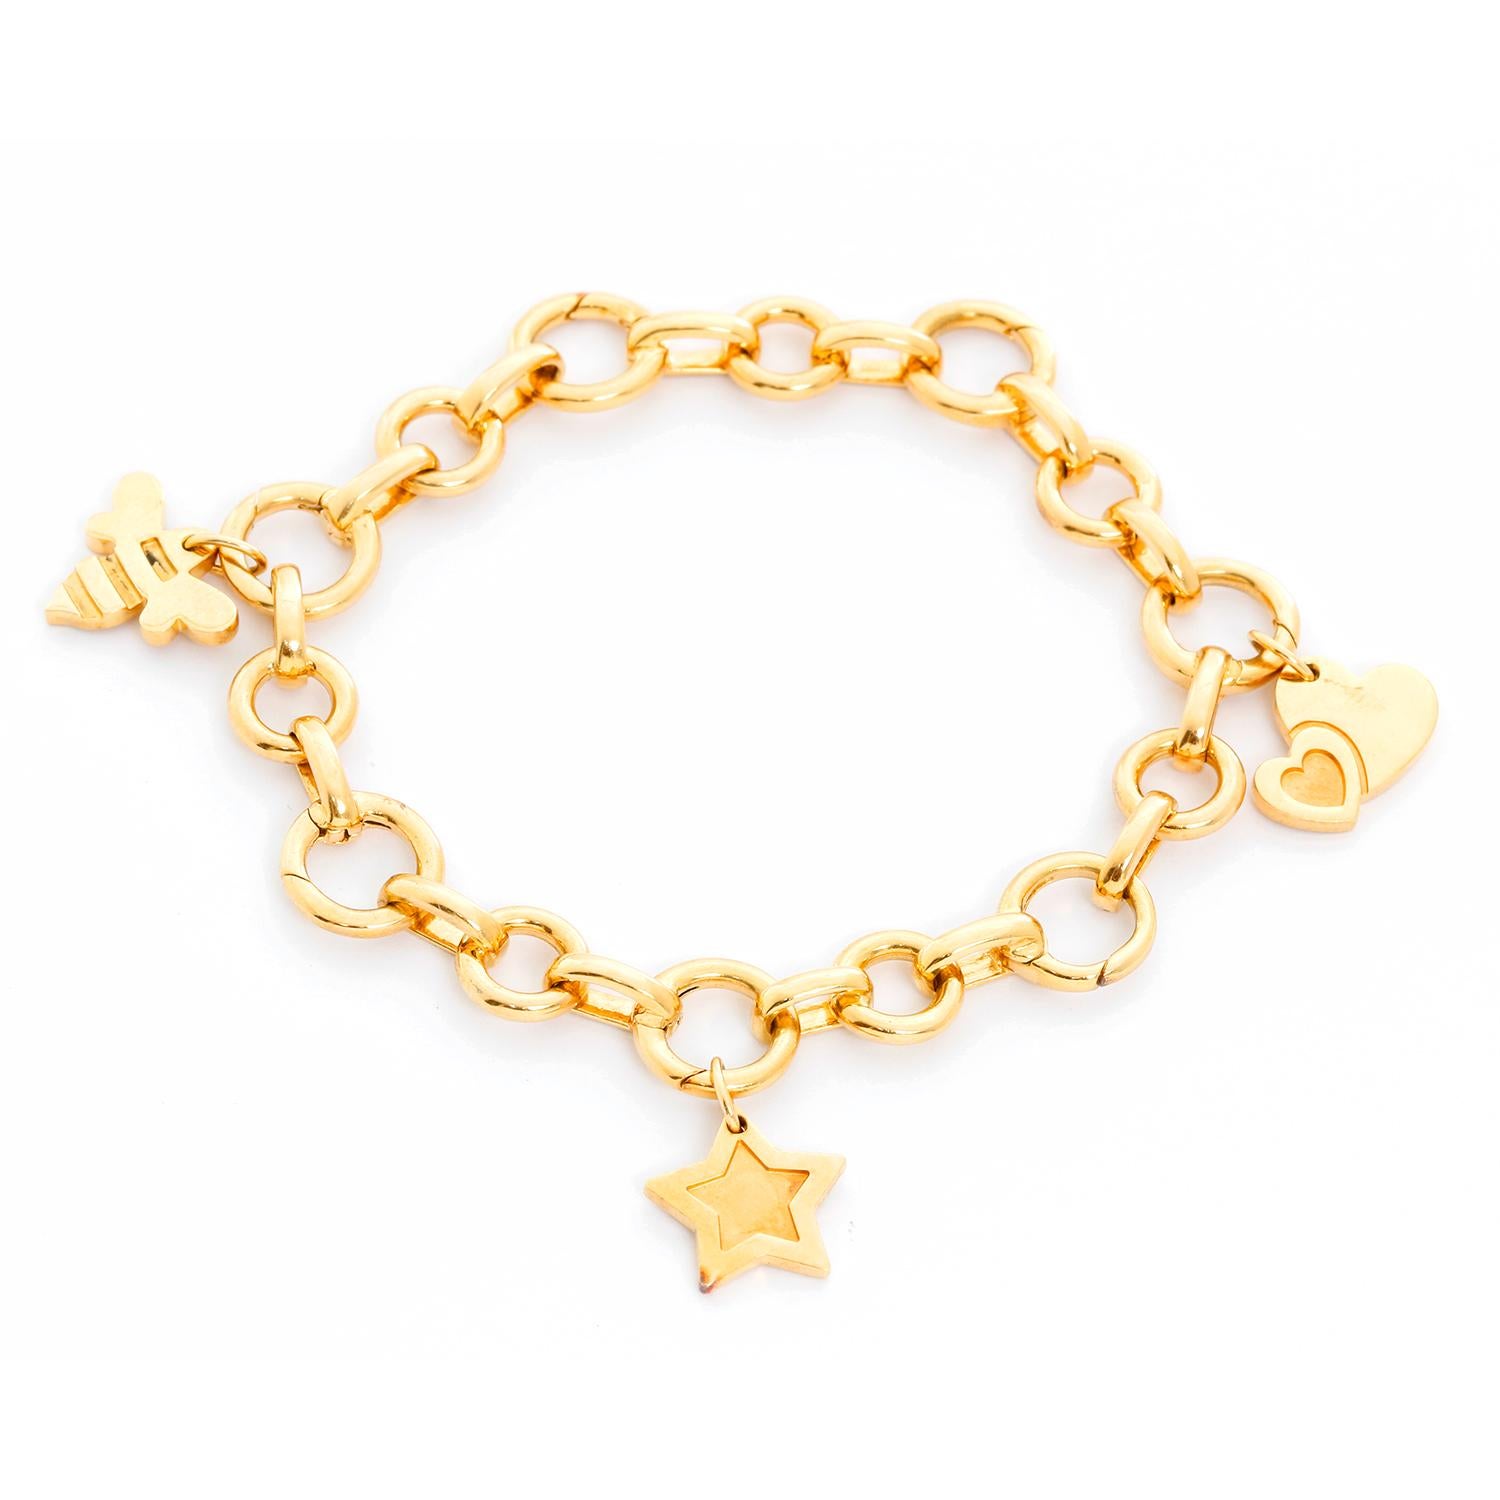 Aaron Basha Open Link Charm Bracelet with Tiffany & Co. Charms - 18K Yellow Gold Bracelet with small open links ( 7 ) for charms. Wrist size 6 3/4 inches. Total weight 24.4 grams. Hallmarked on each link AAron Basha. Includes three Tiffany & Co.